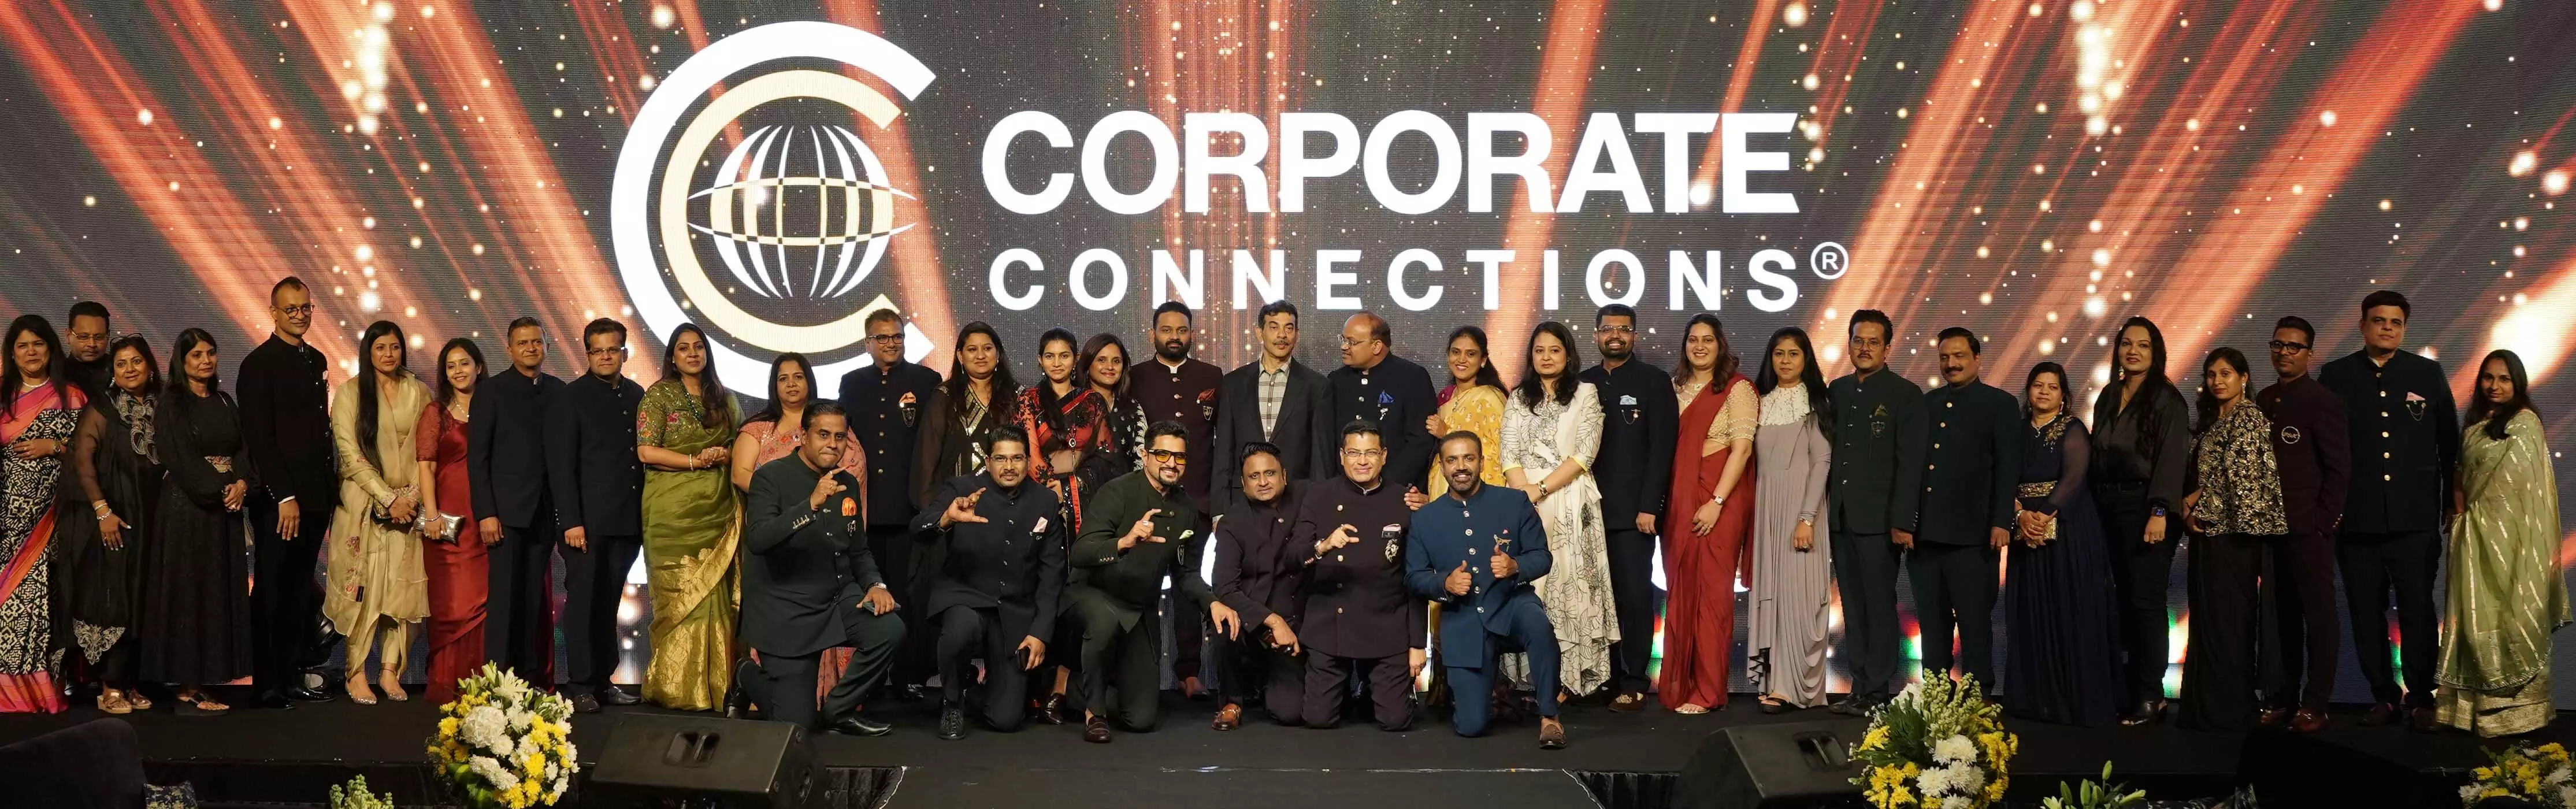 Corporate Connections expands footprint with new Hyderabad chapter